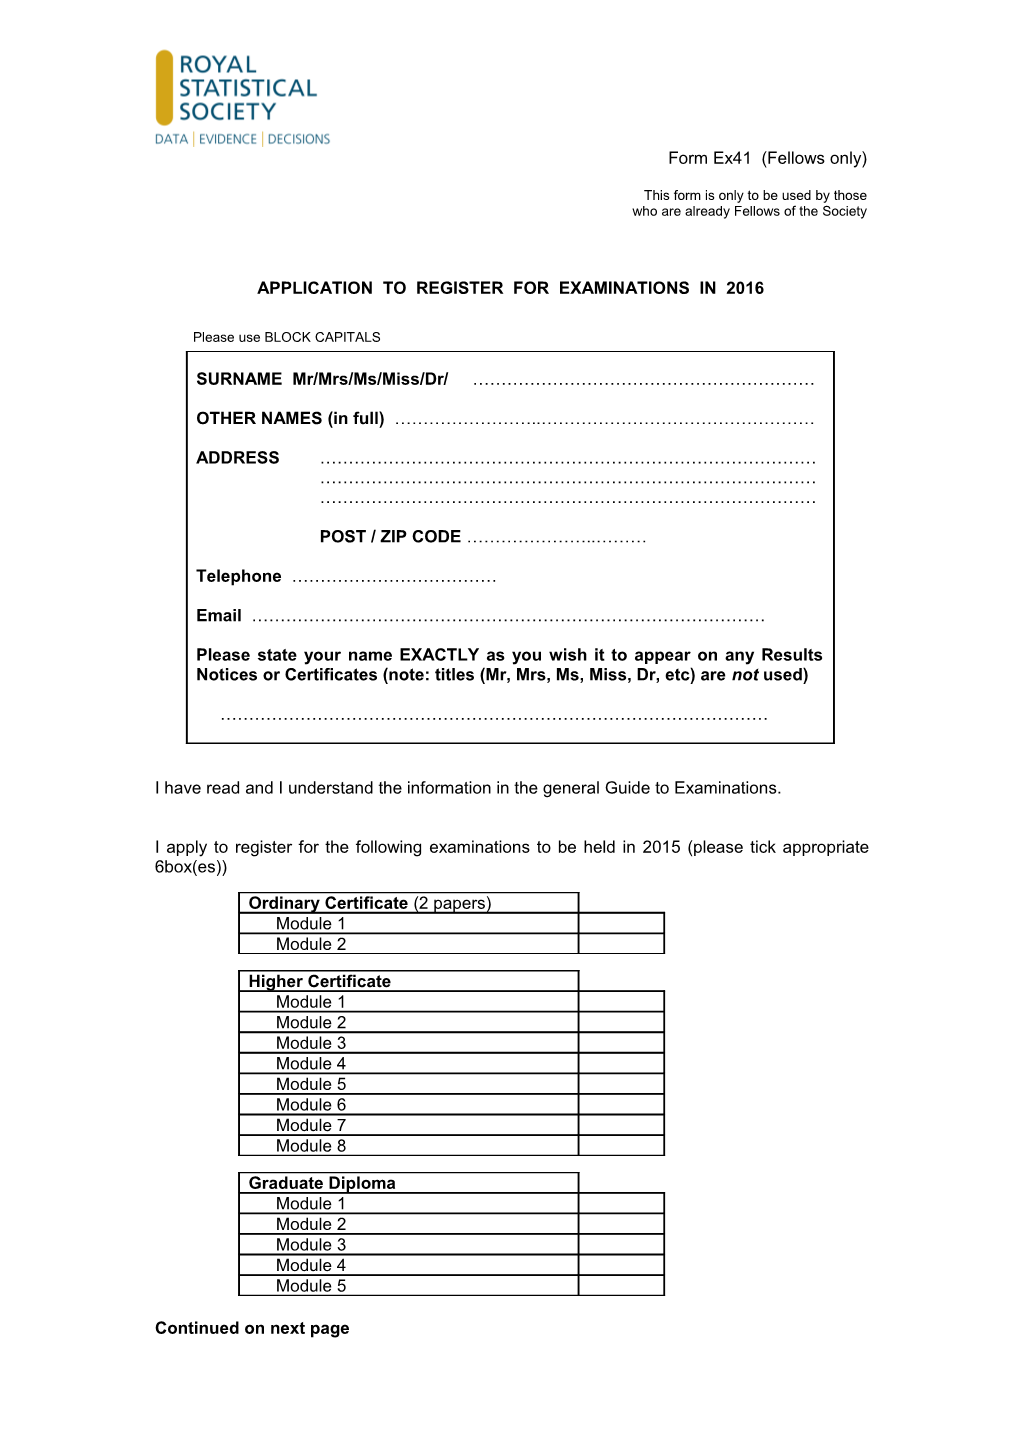 Application to Register for Examinations in 2016